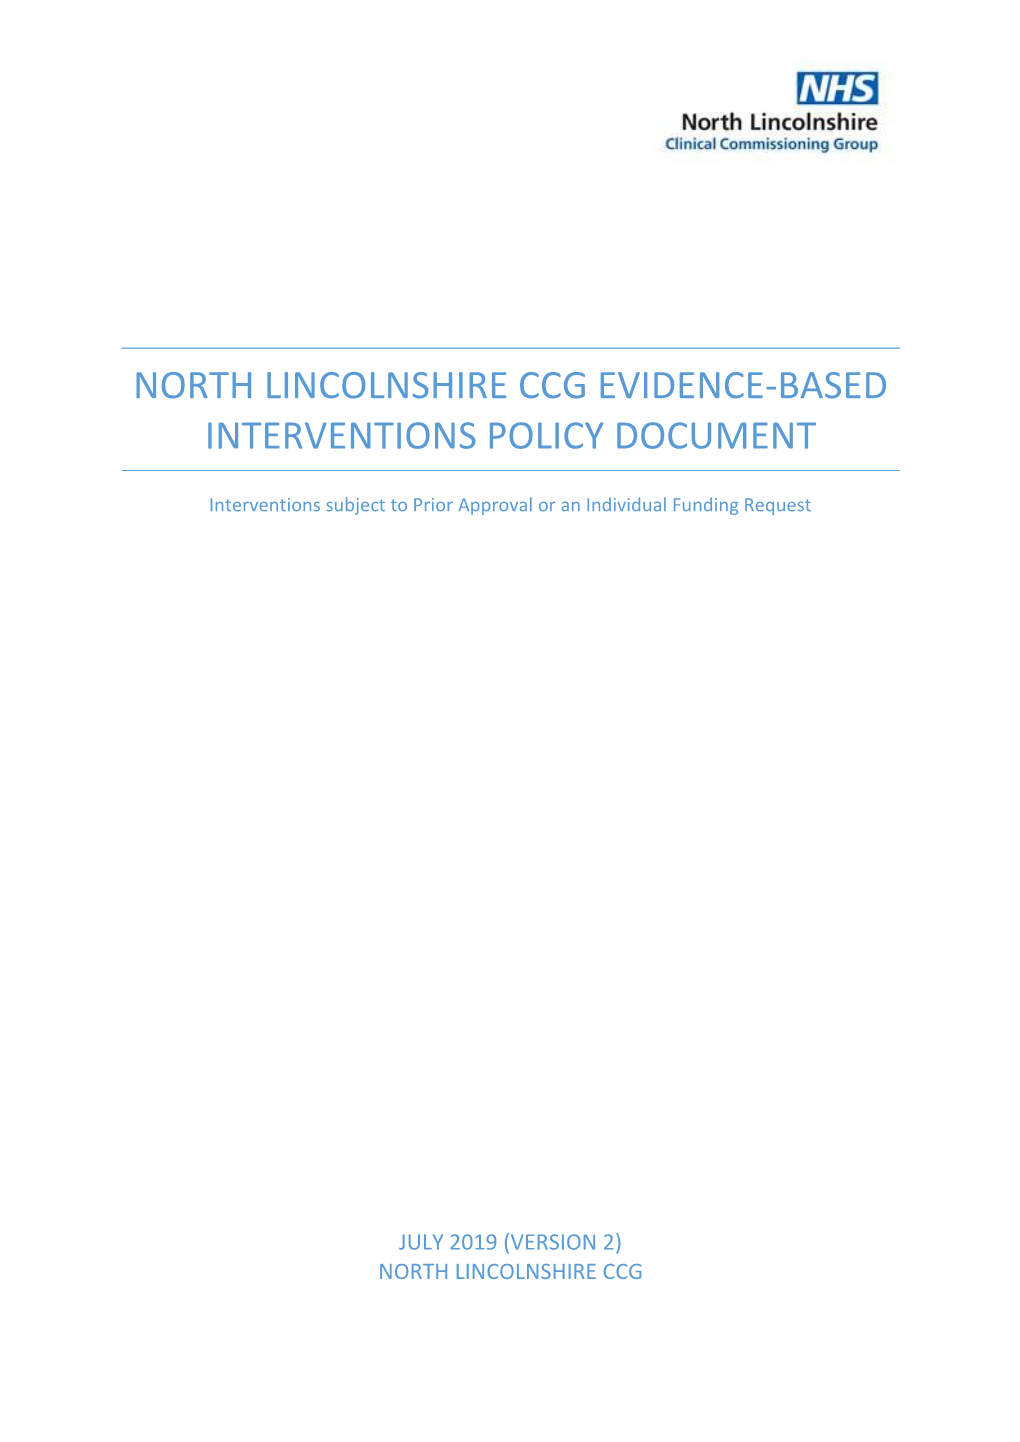 North Lincolnshire Ccg Evidence-Based Interventions Policy Document